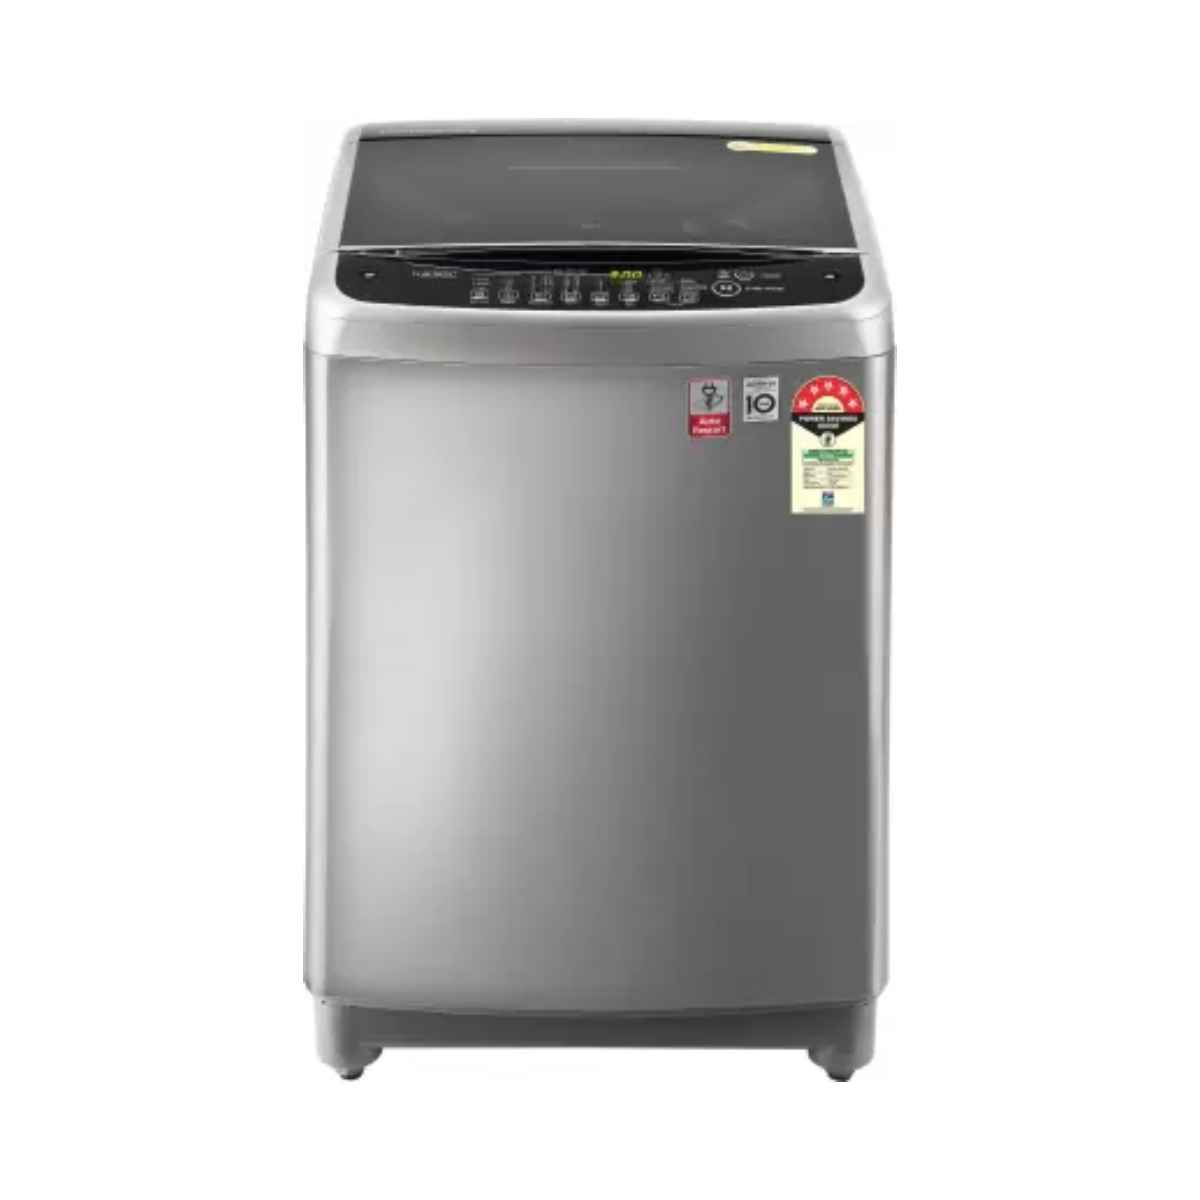 LG 10 kg Fully Automatic Top Load washing machine (T10SJSS1Z)